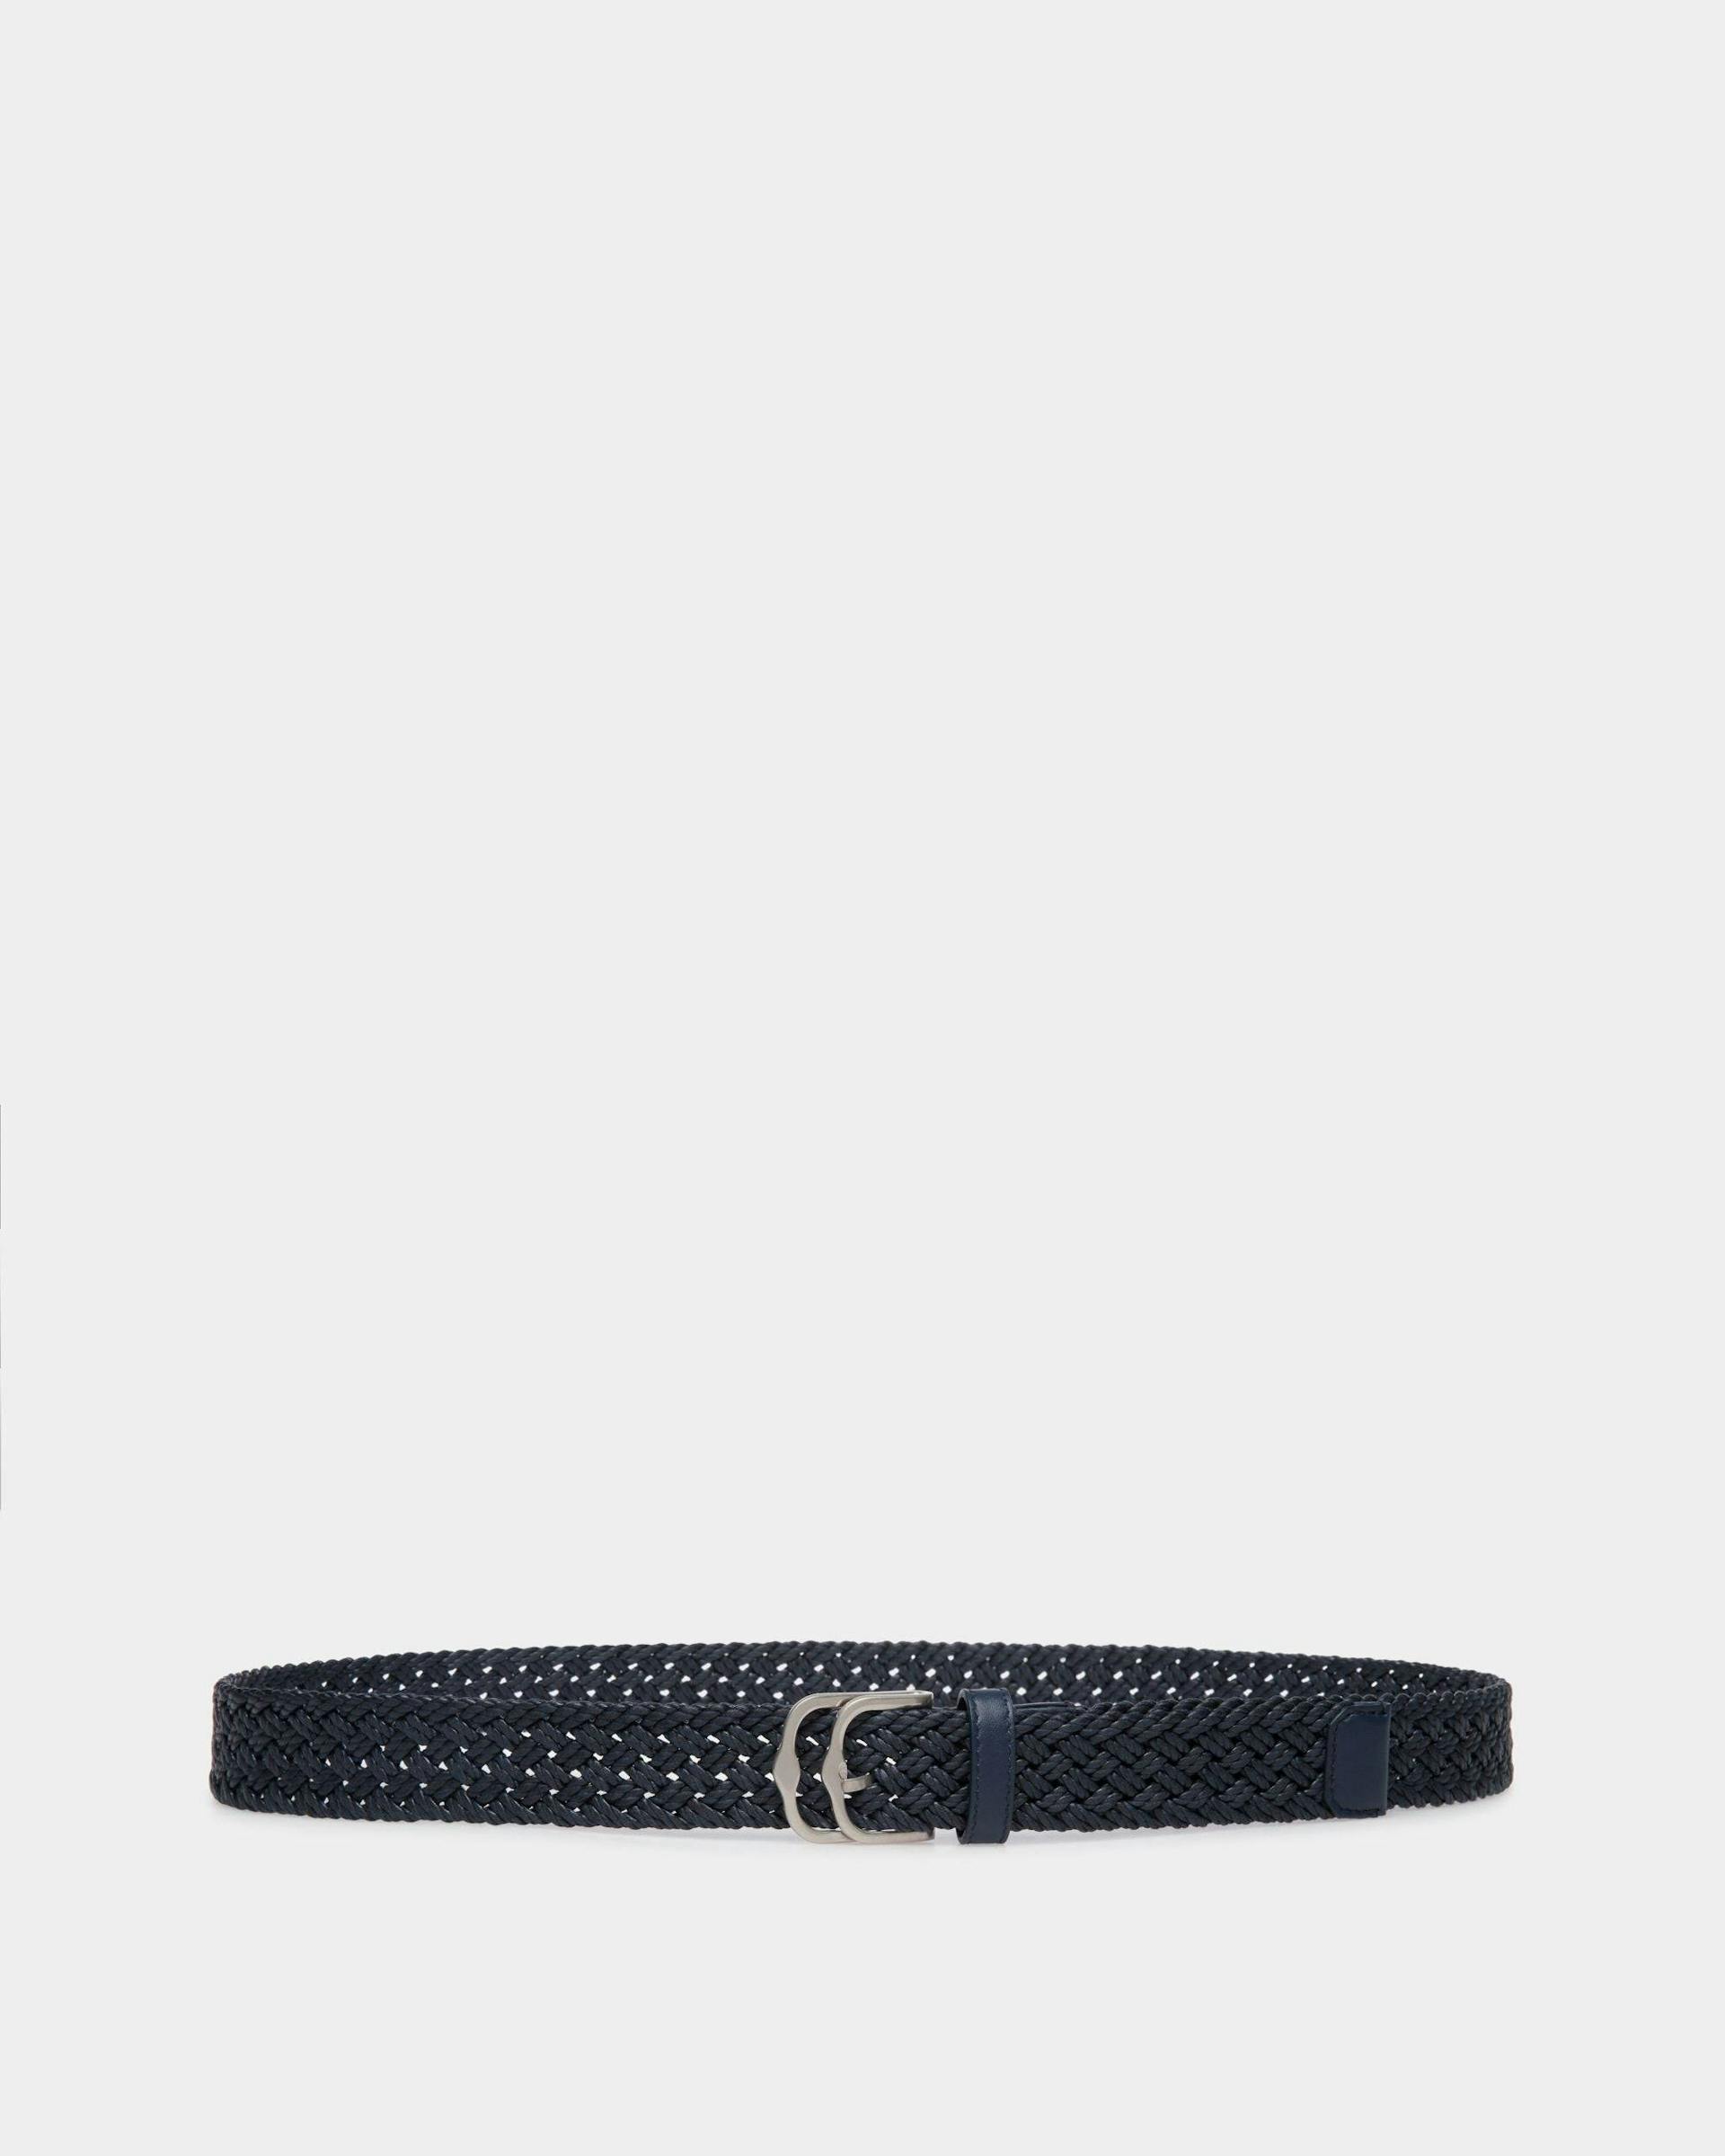 Men's Embert 30mm Belt in Fabric And Leather | Bally | Still Life Front